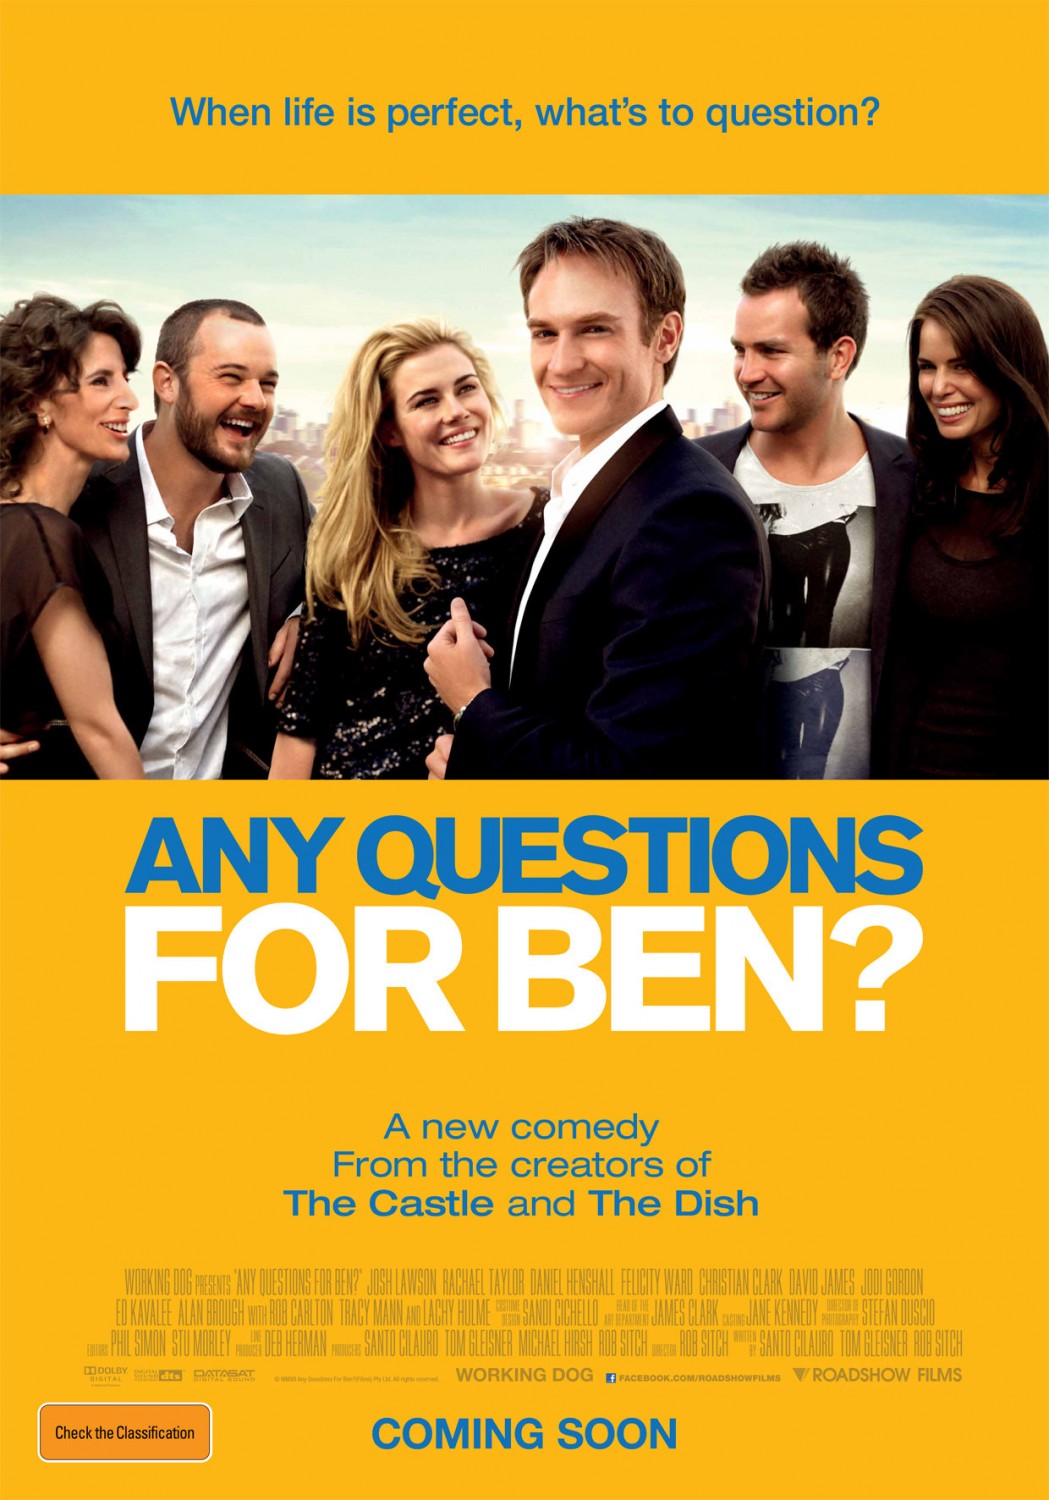 Extra Large Movie Poster Image for Any Questions for Ben? 